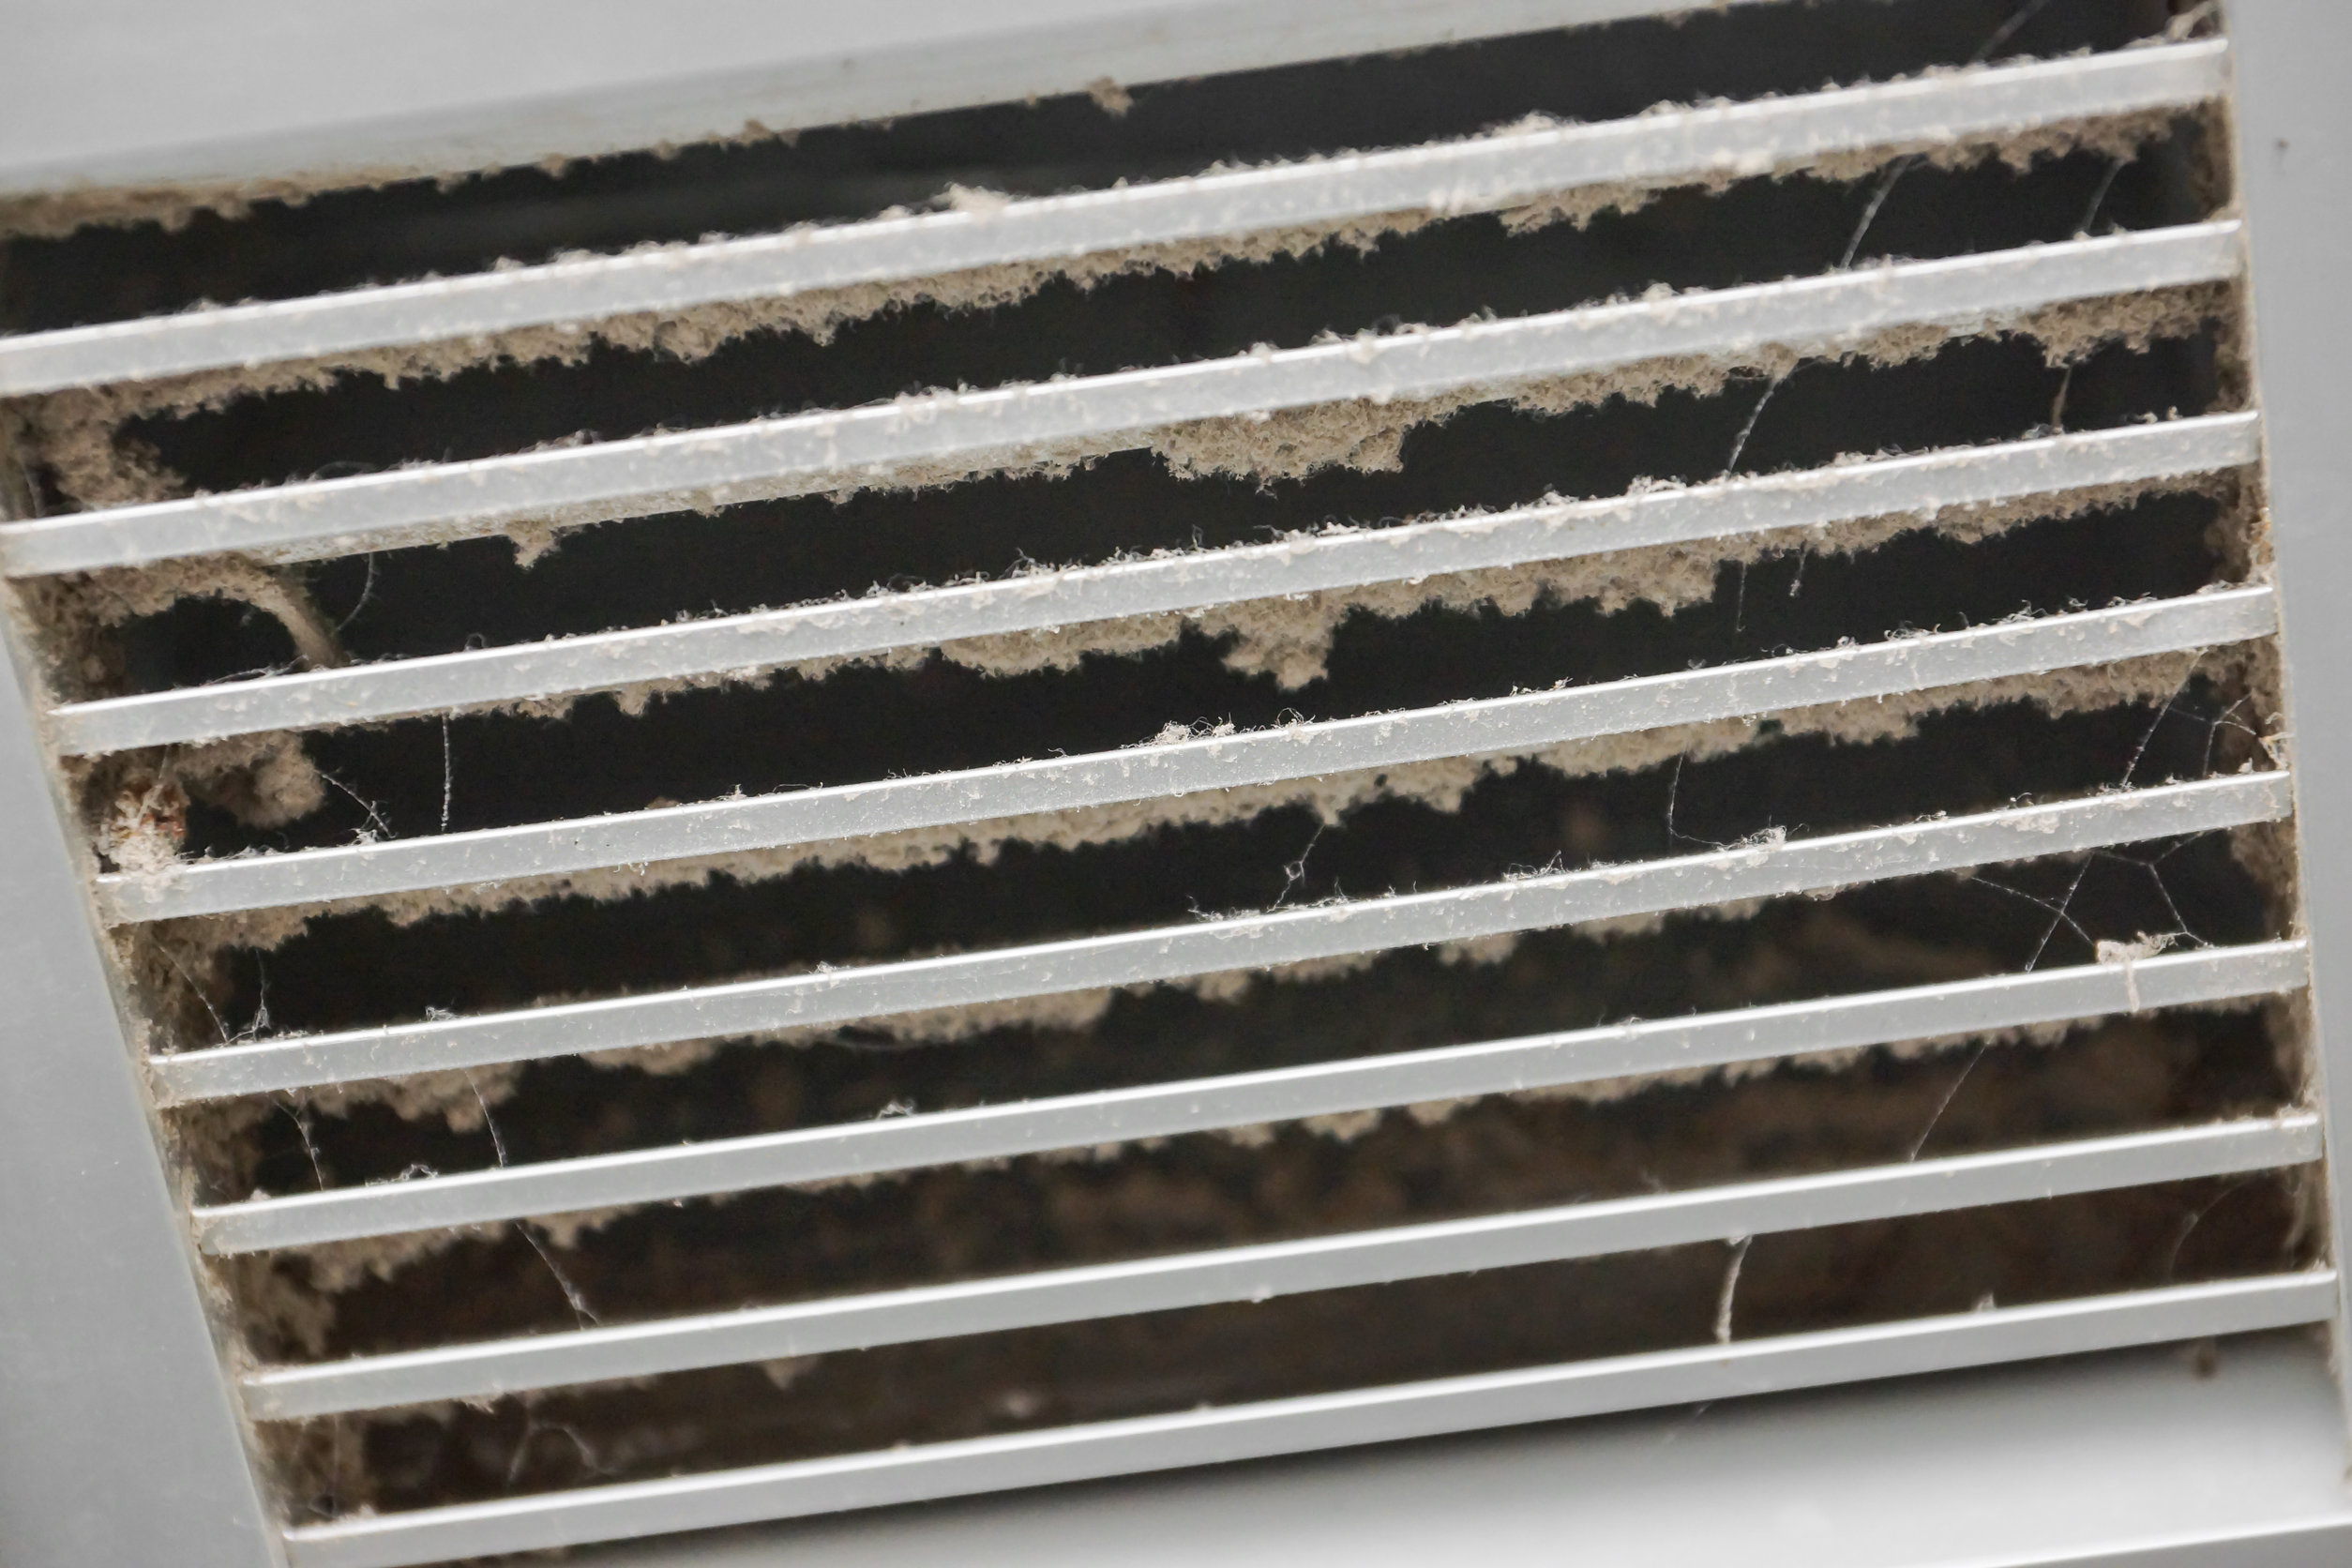 What You Need to Know About Clogged Dryer Vents